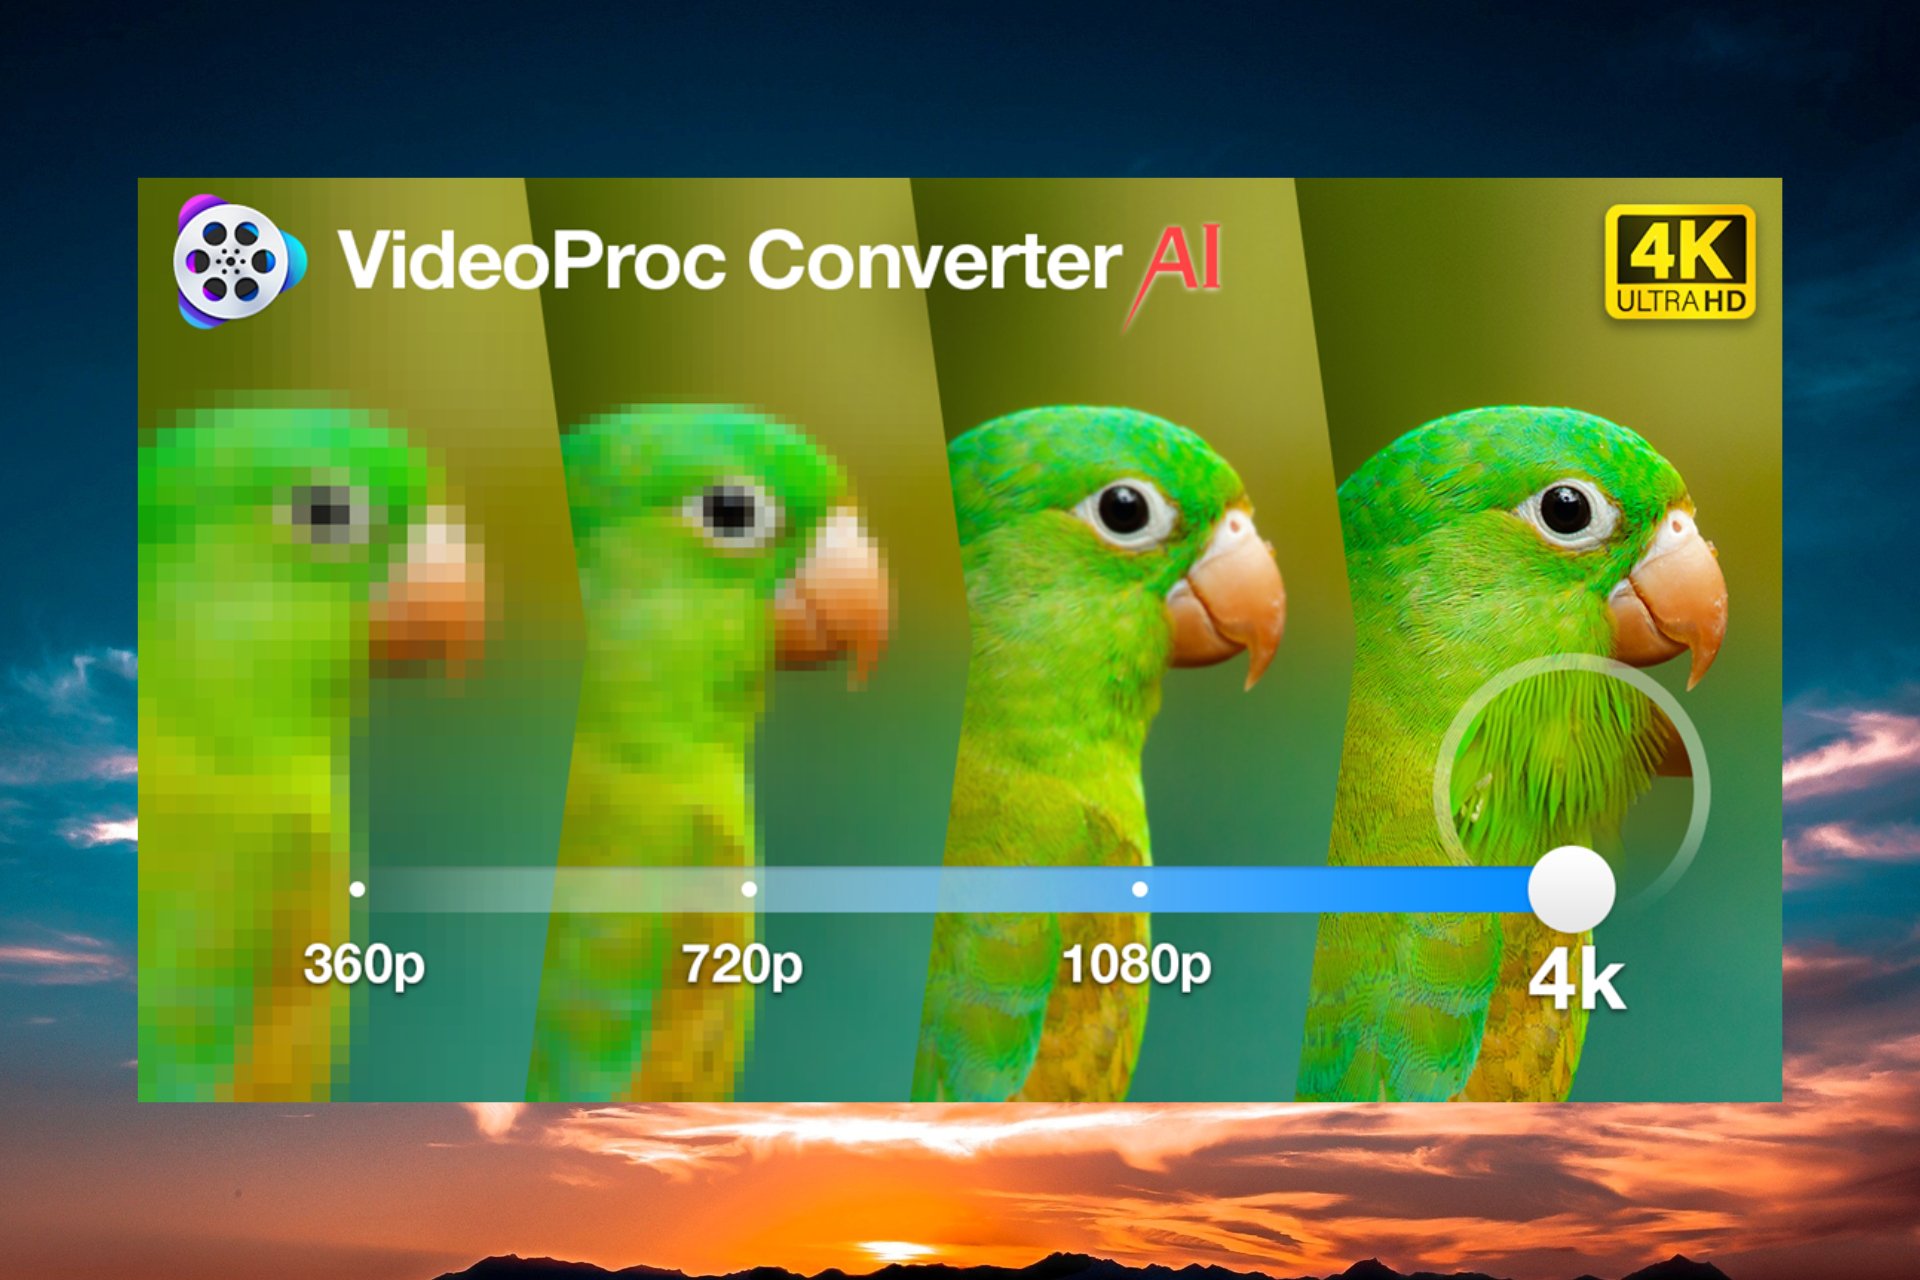 How to upscale and enhance video using VideoPro Converter AI